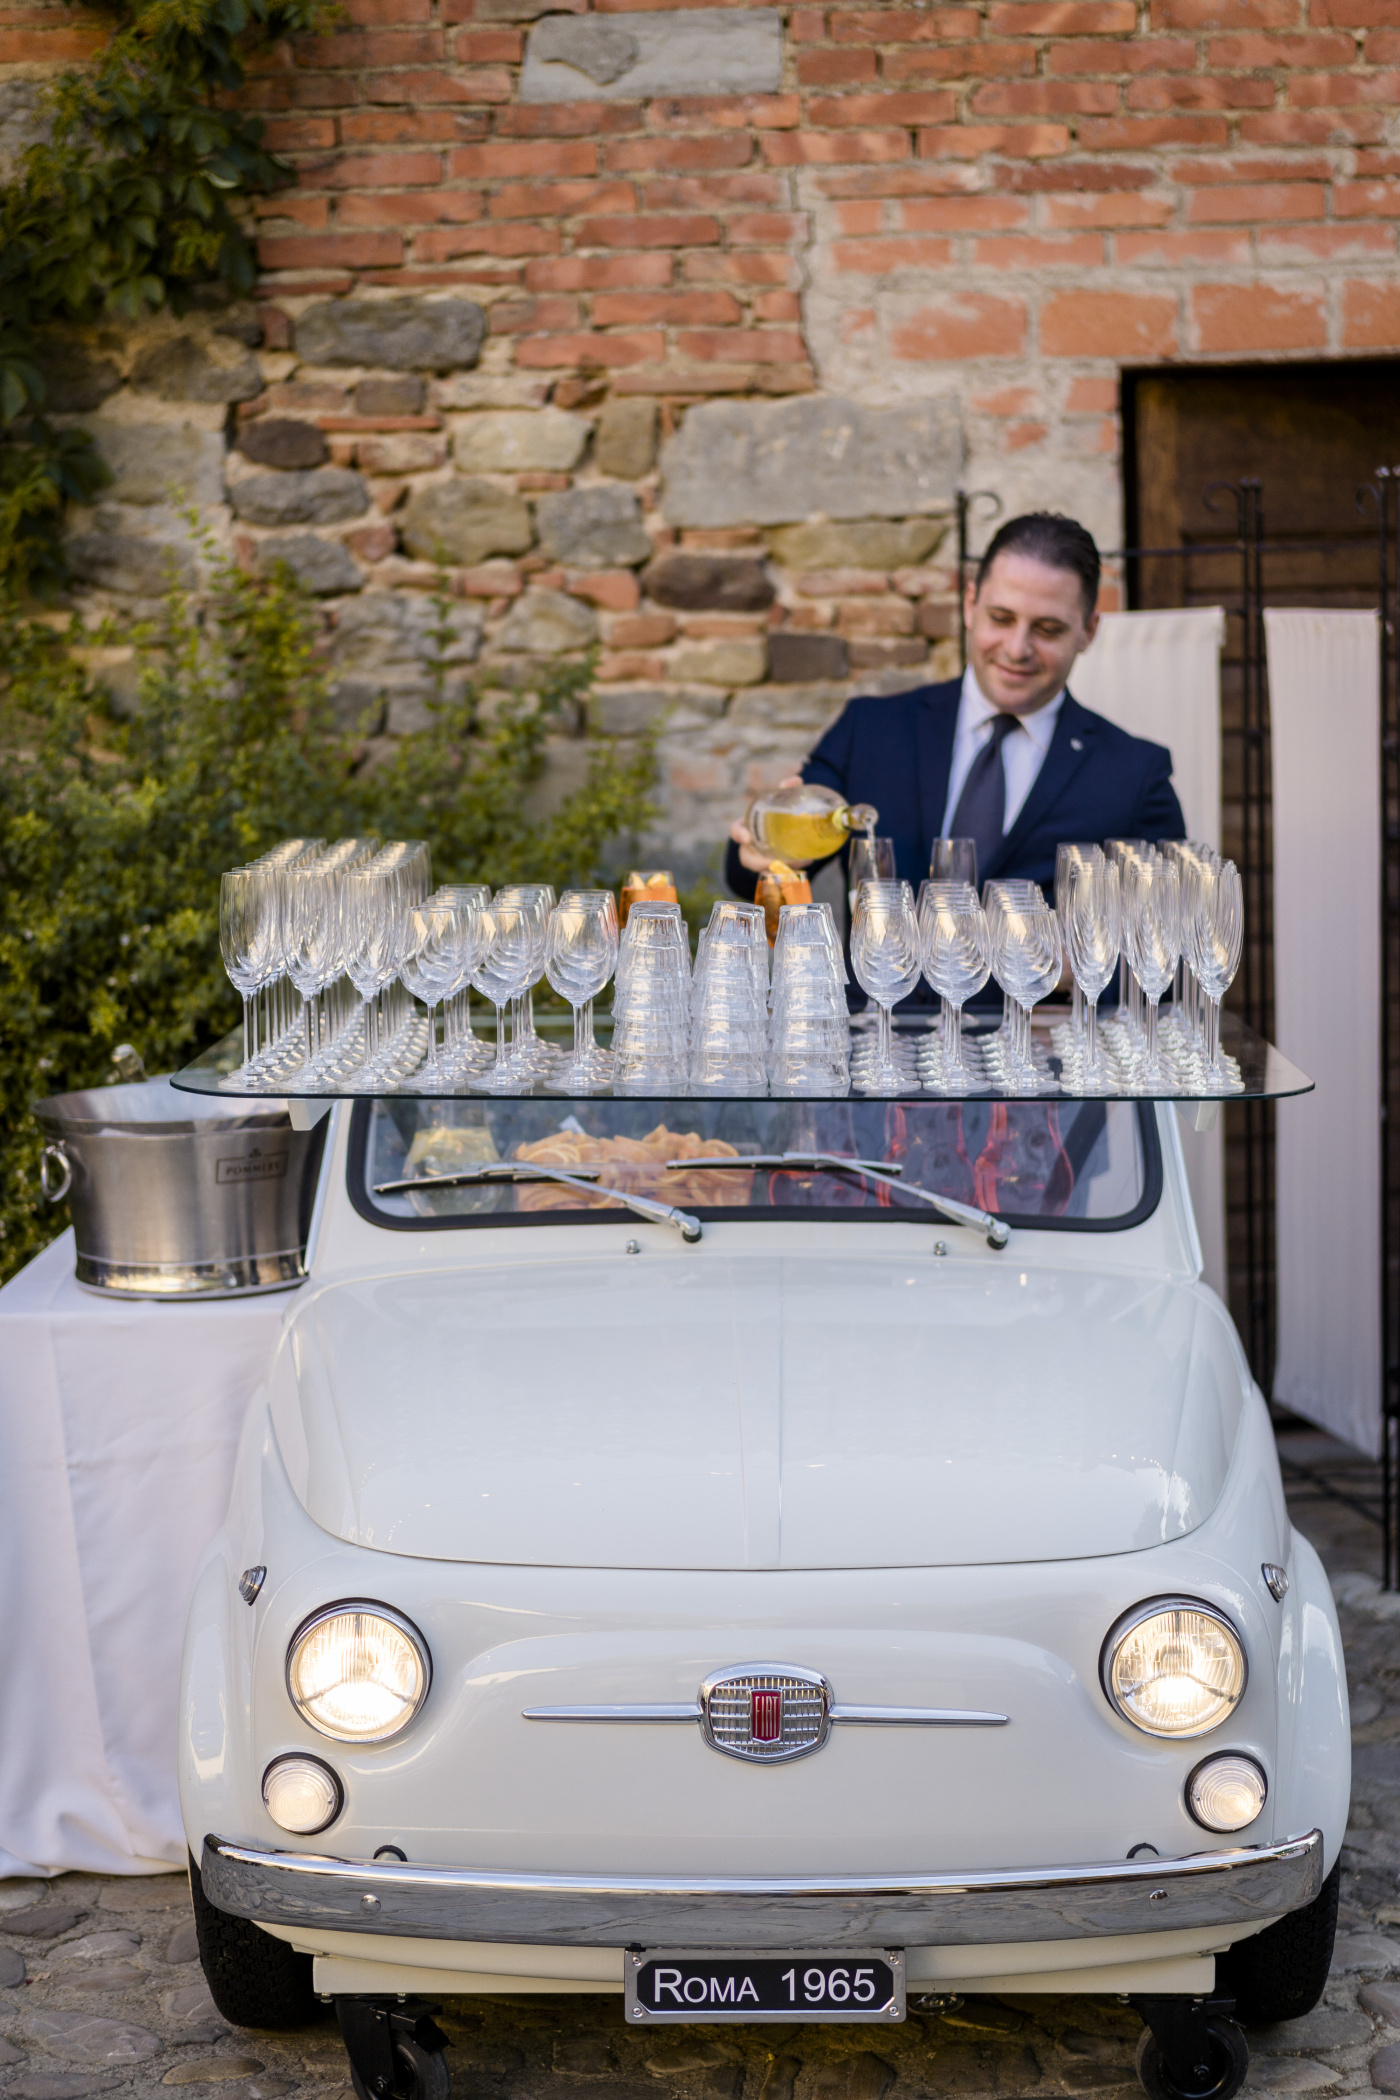 500 fiat car bar station for a 50th birthday party